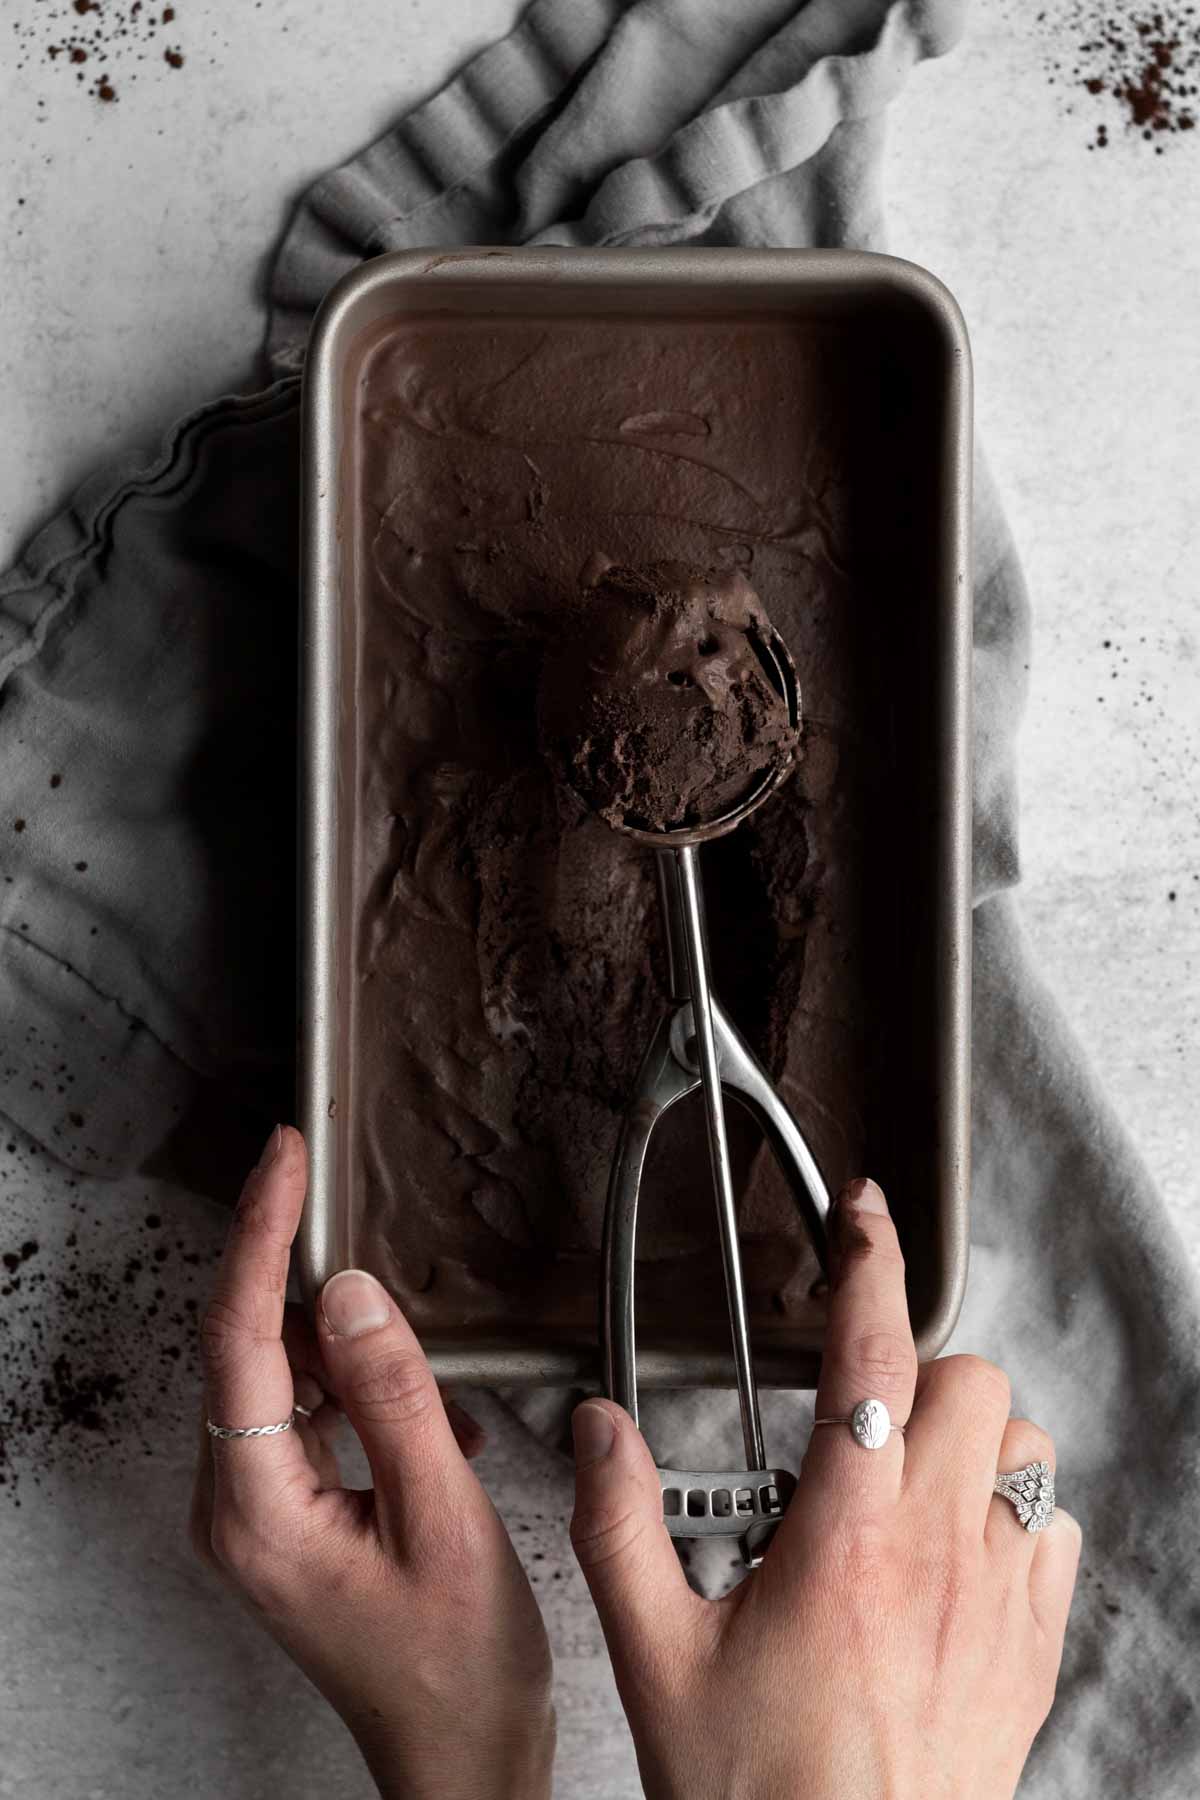 Hands take a scoop of Chocolate Ice Cream from a pan.